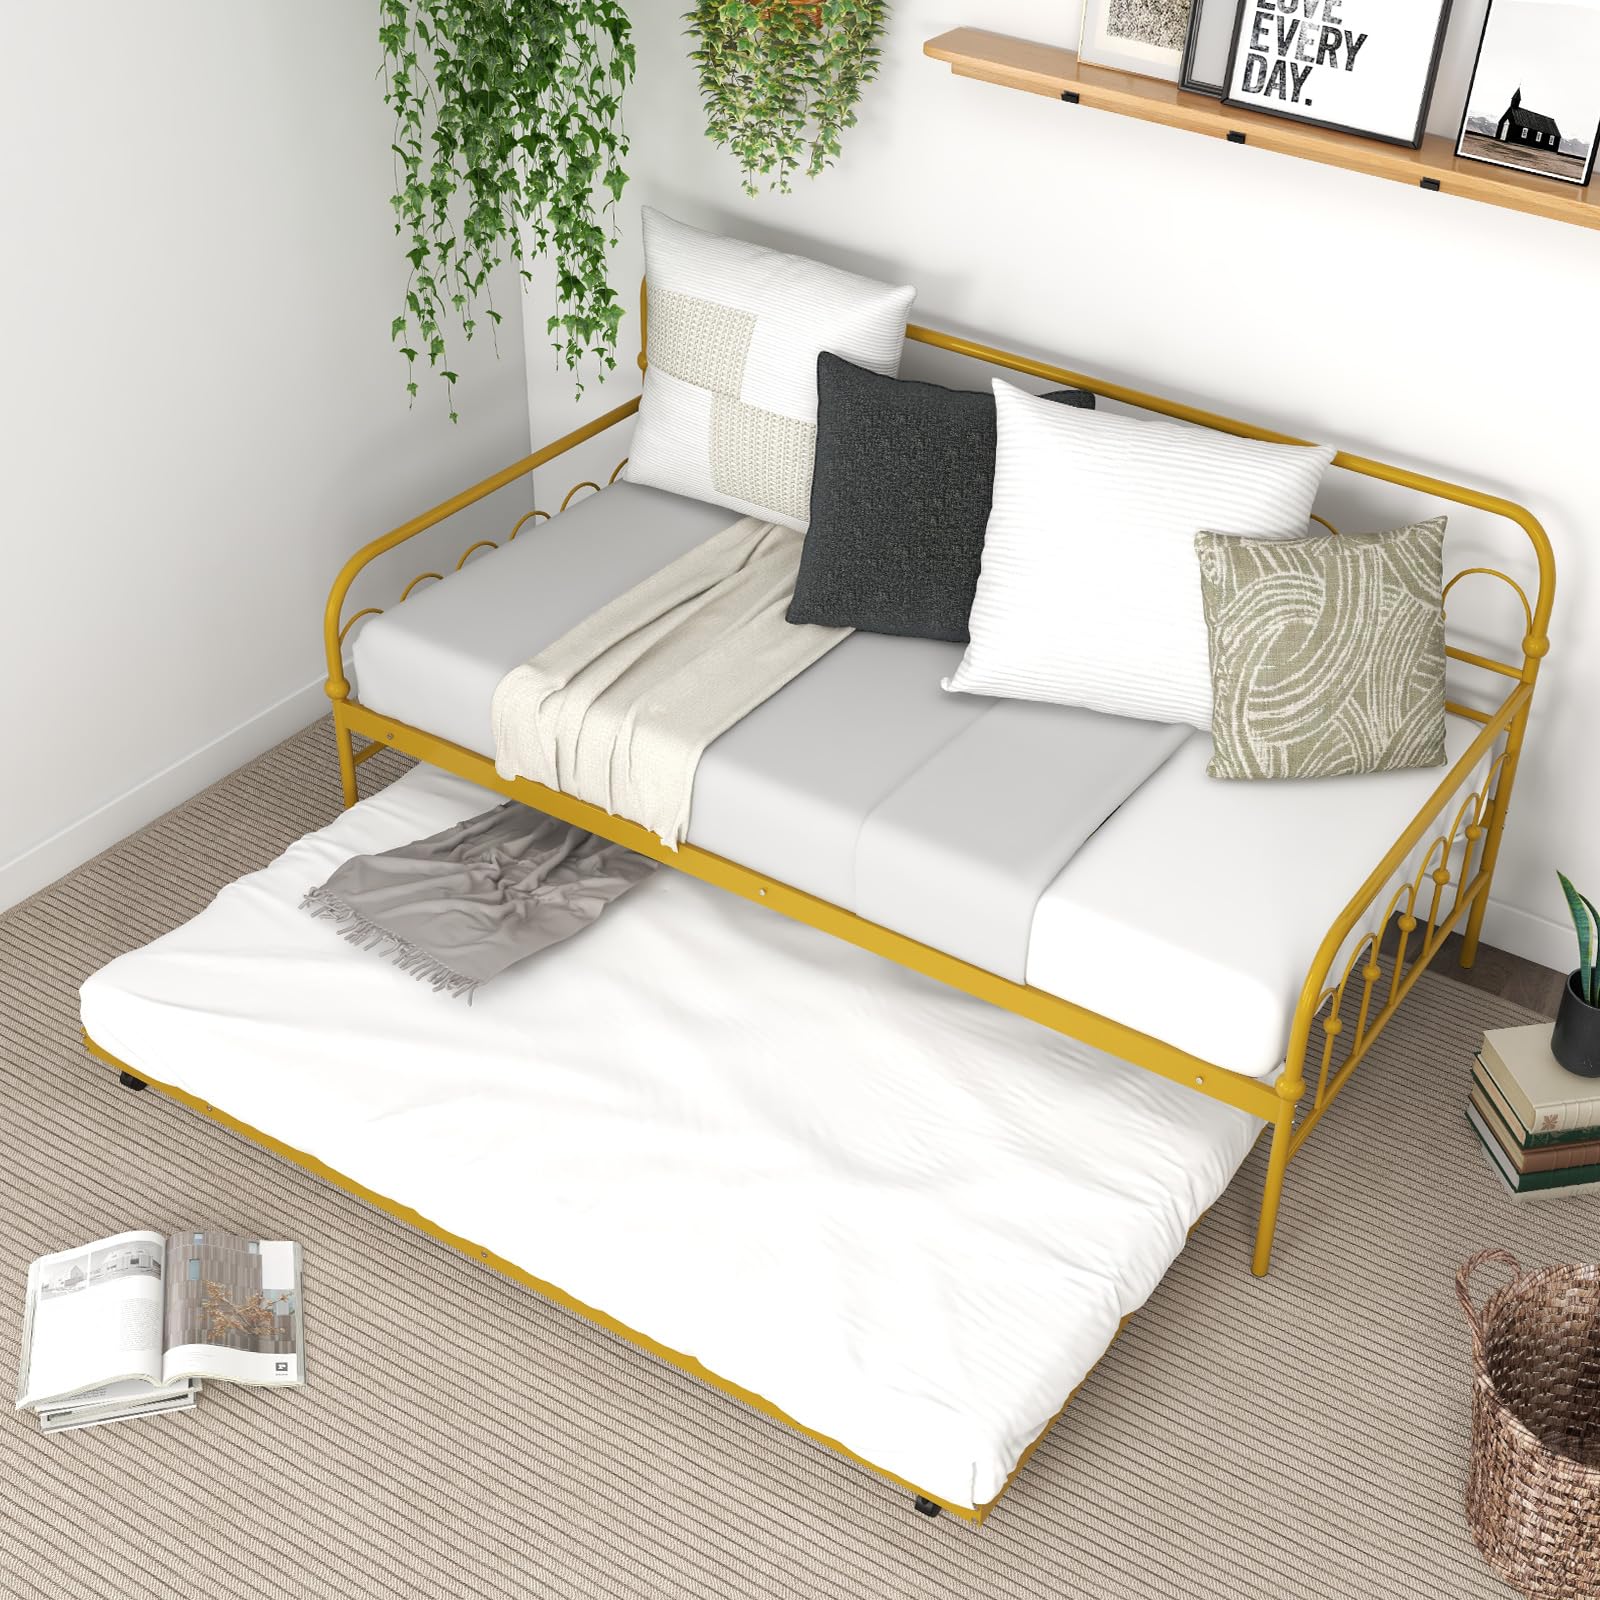 Giantex Twin Daybed with Trundle Gold, Metal Day Bed with Convenient Pull-Out Trundle Bed